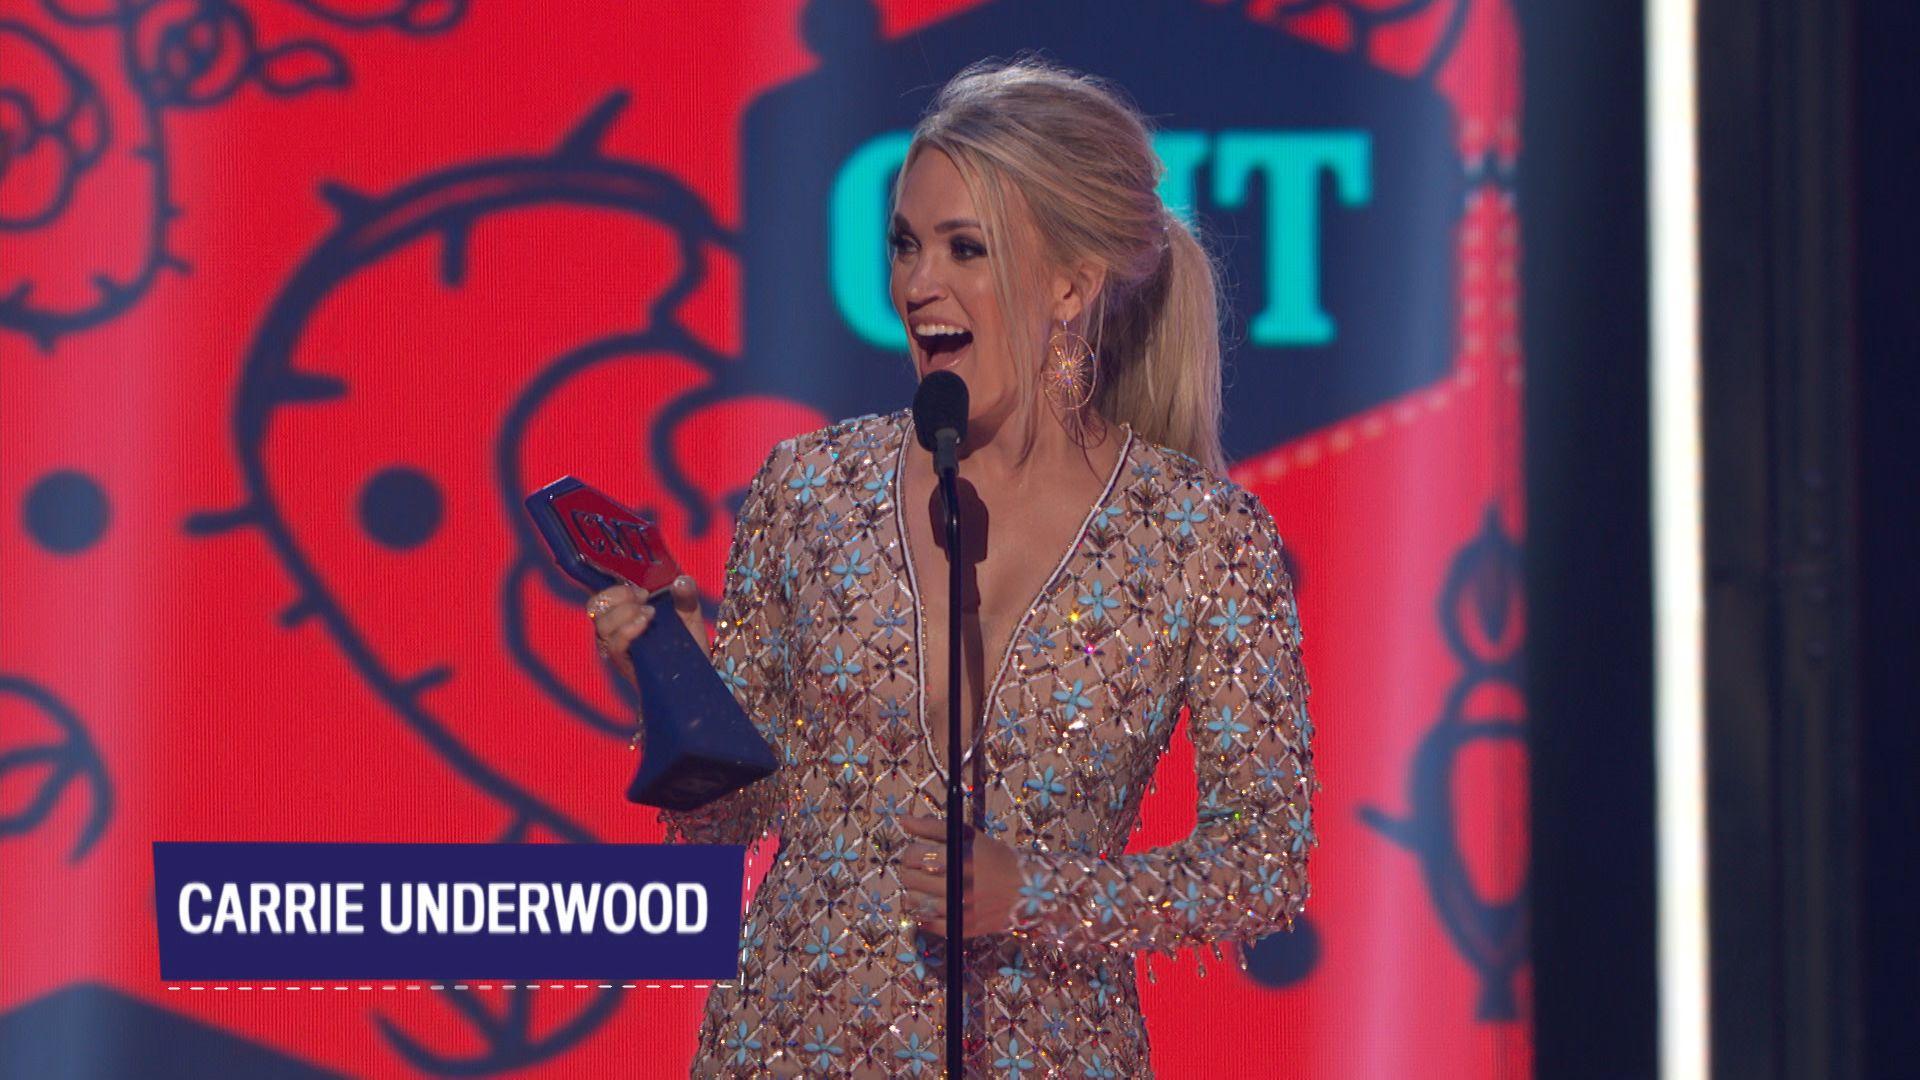 Winning Moments at the 2019 CMT Music Awards